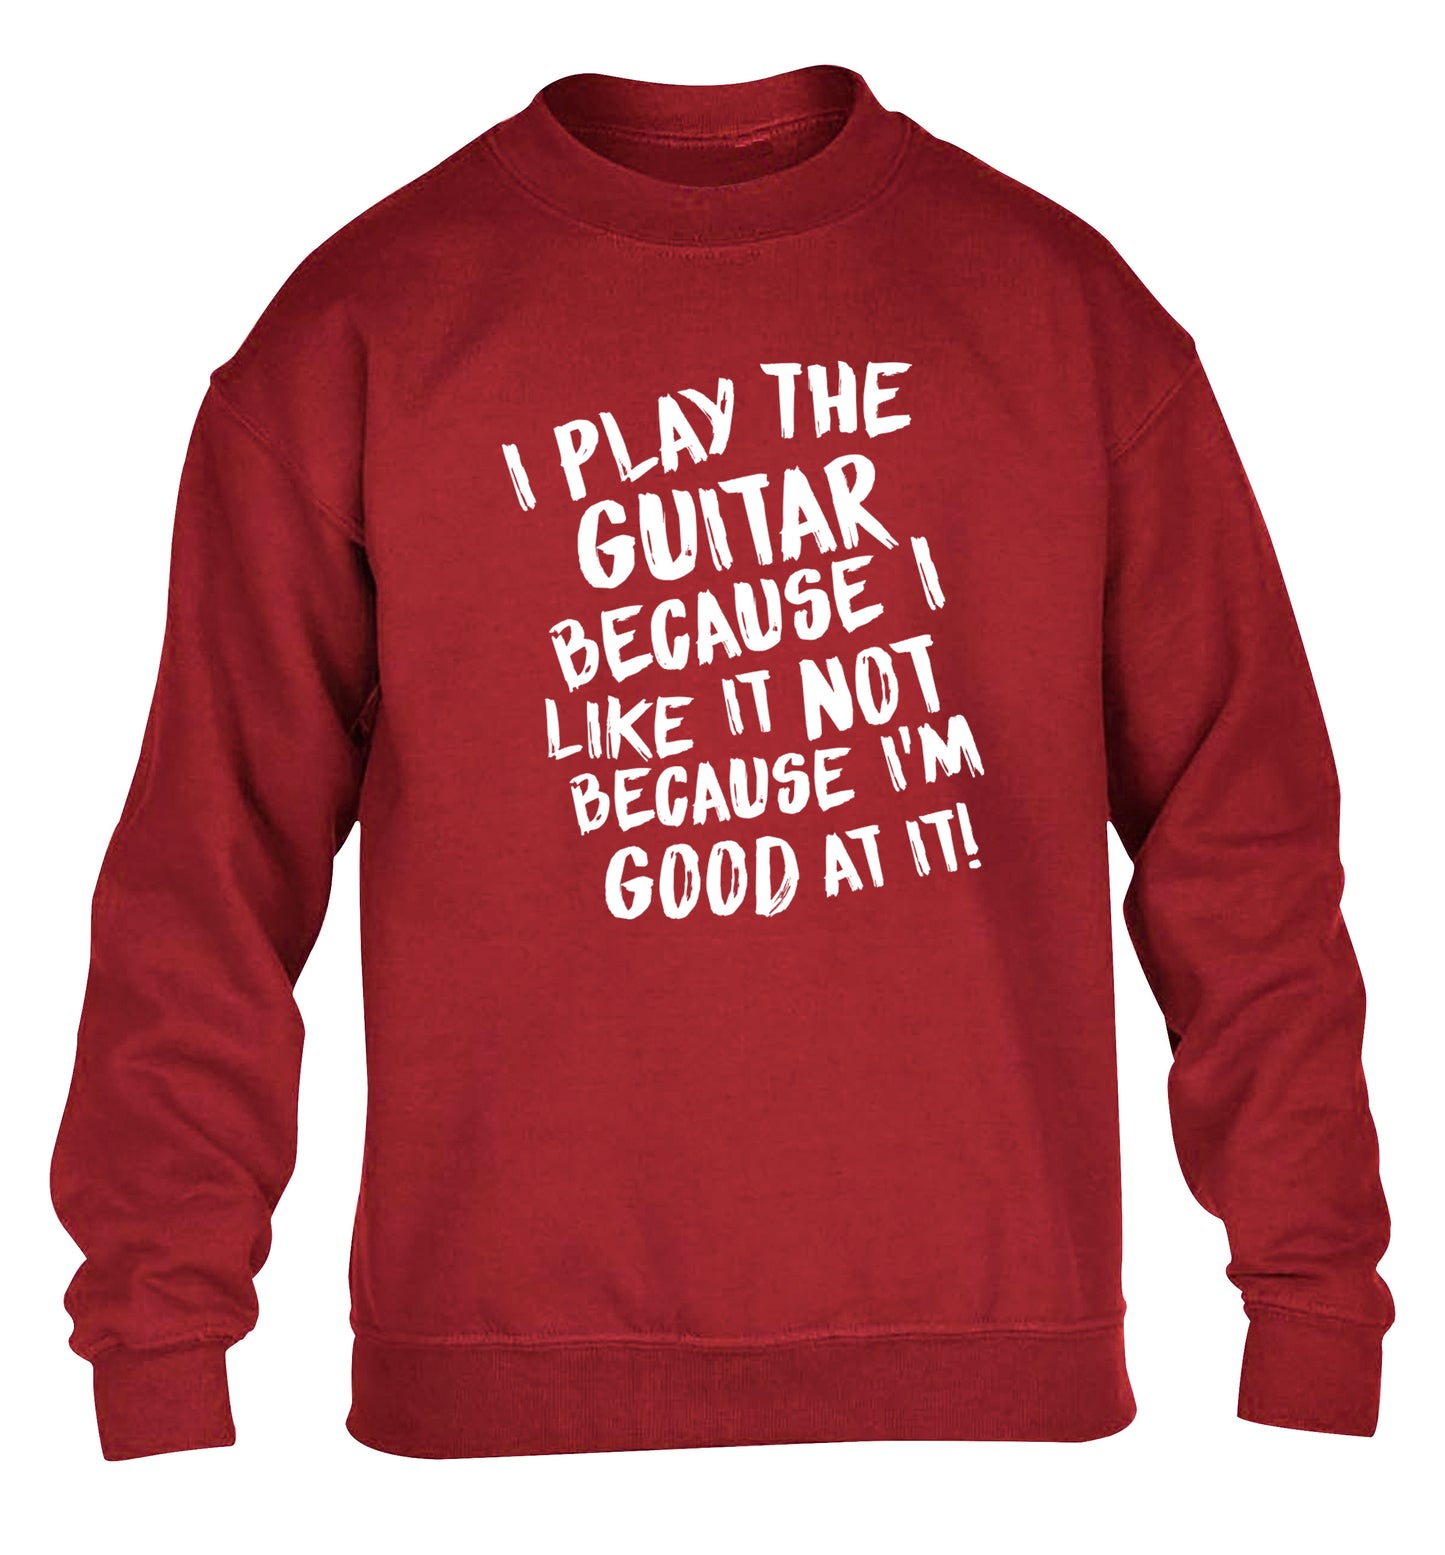 I play the guitar because I like it not because I'm good at it children's grey sweater 12-14 Years